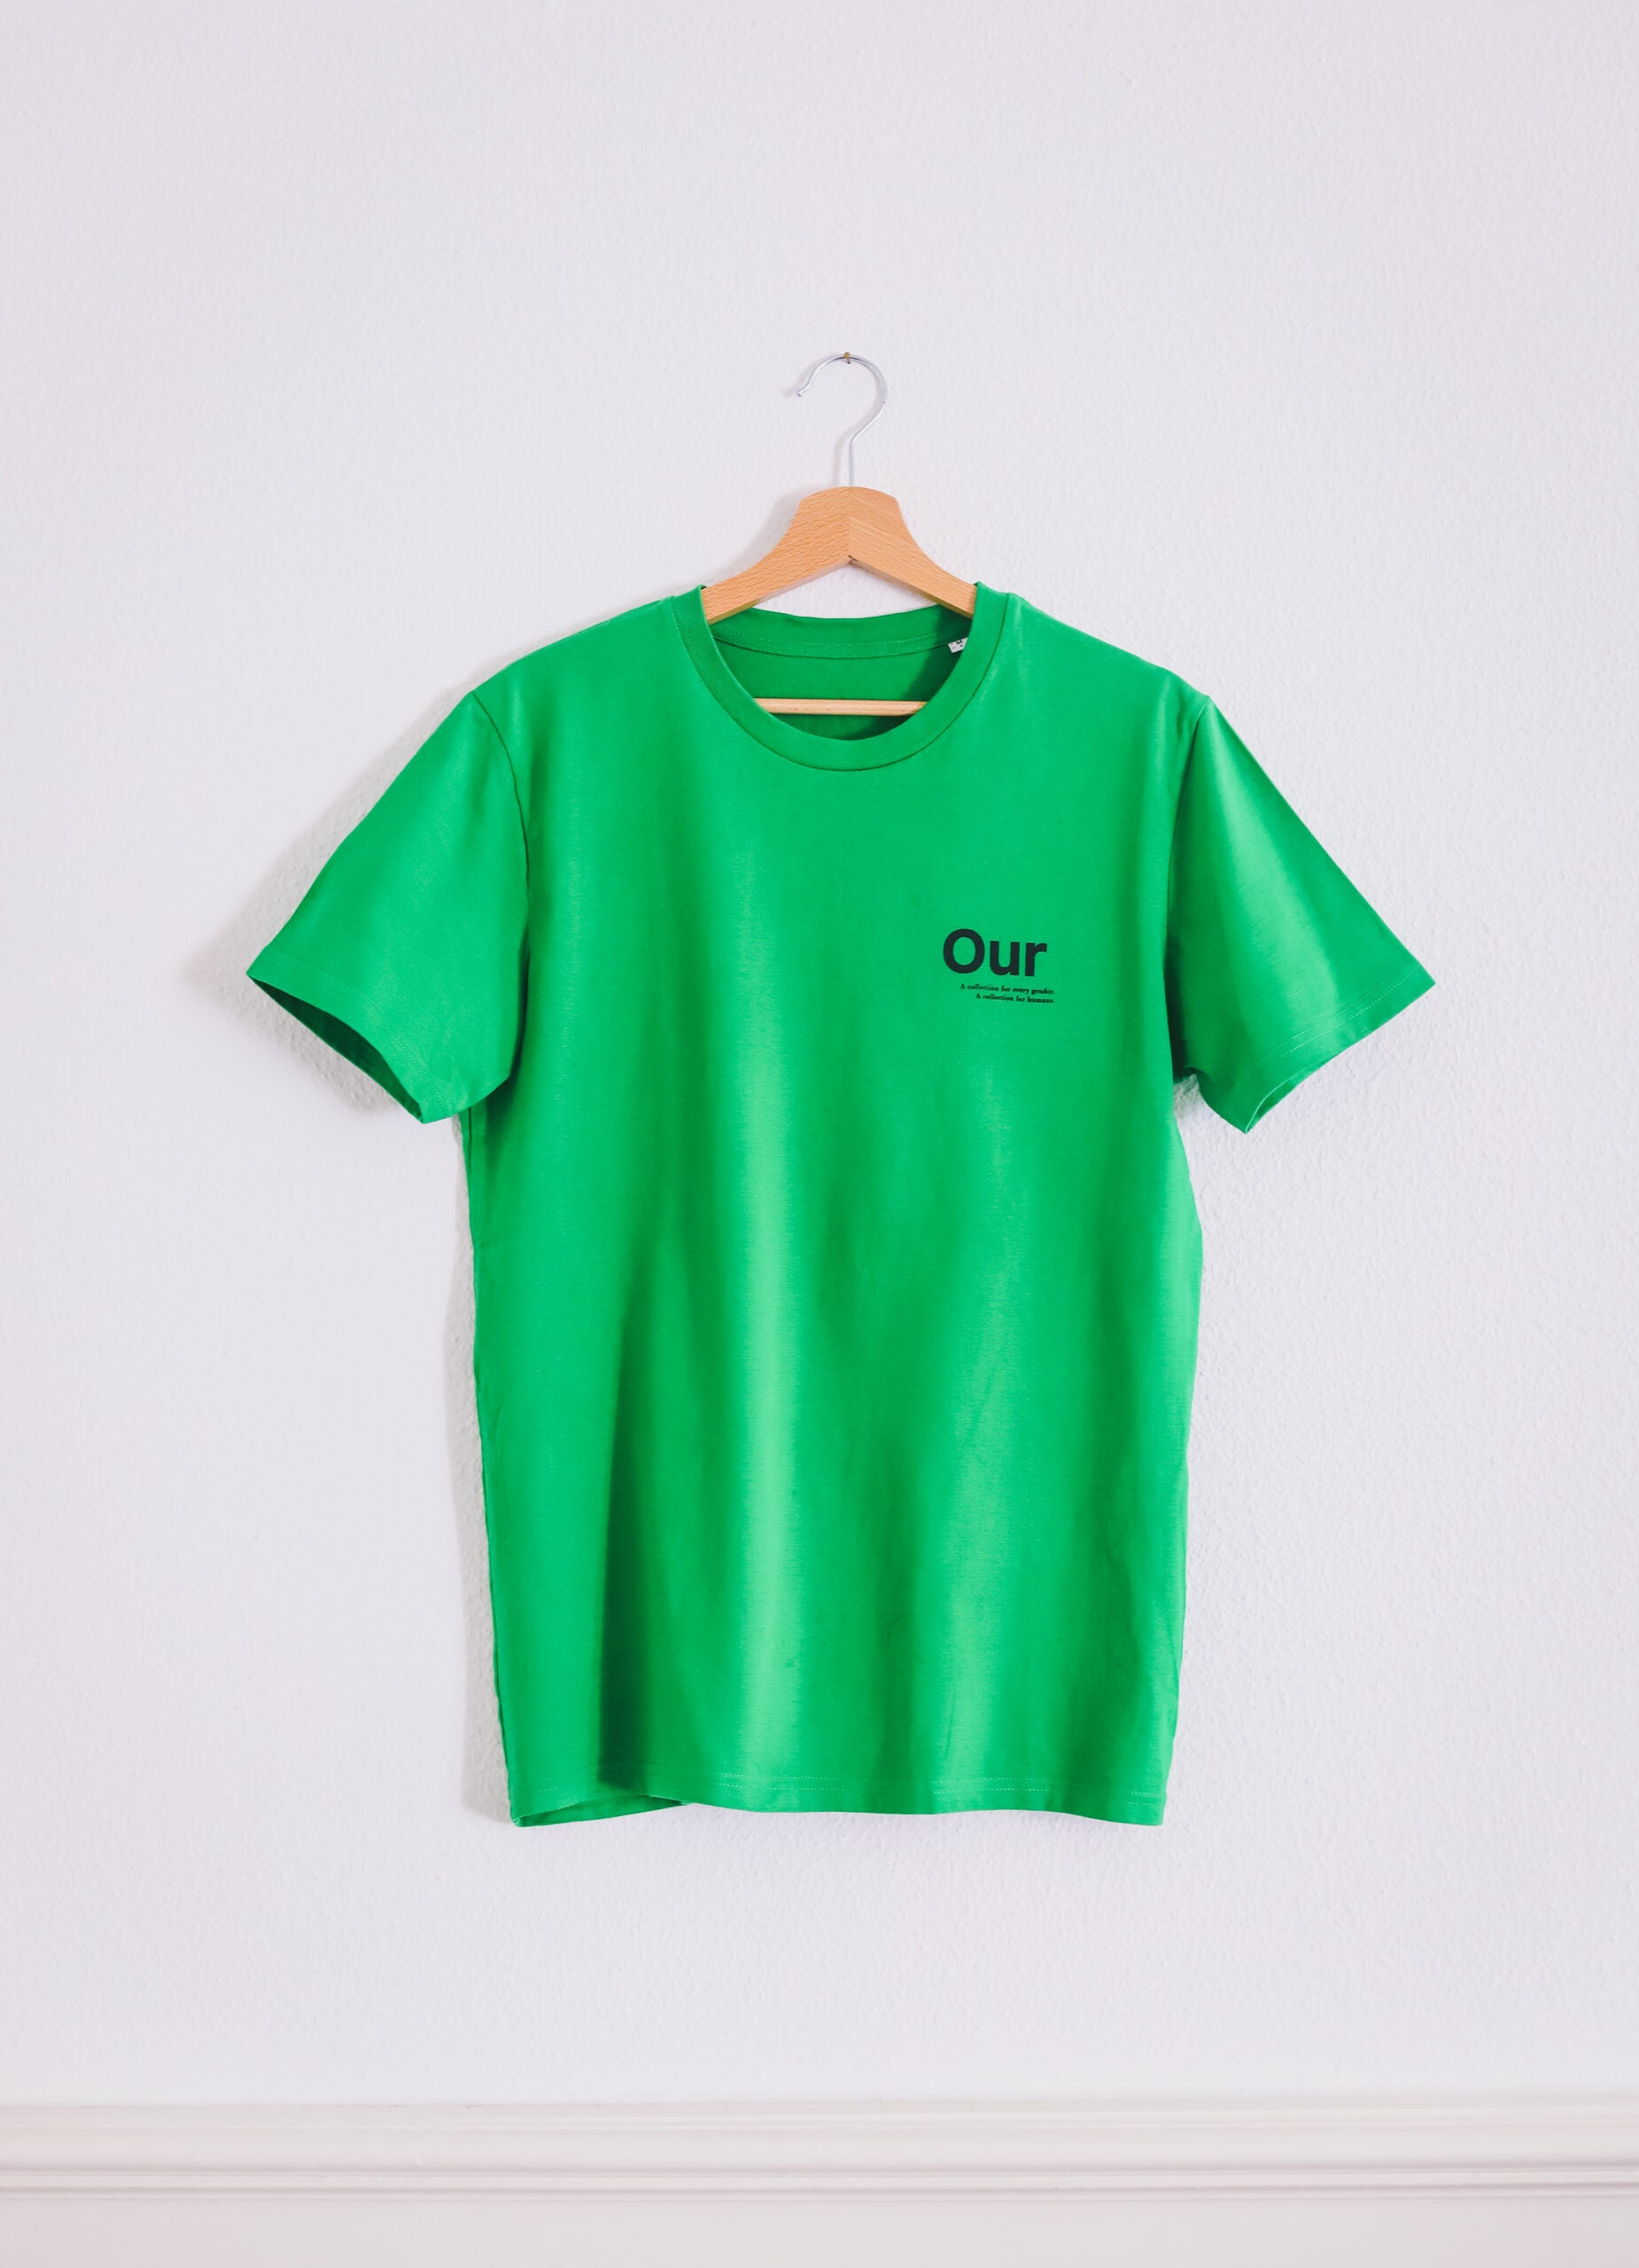 OUR. T. / Our. Shirt Green